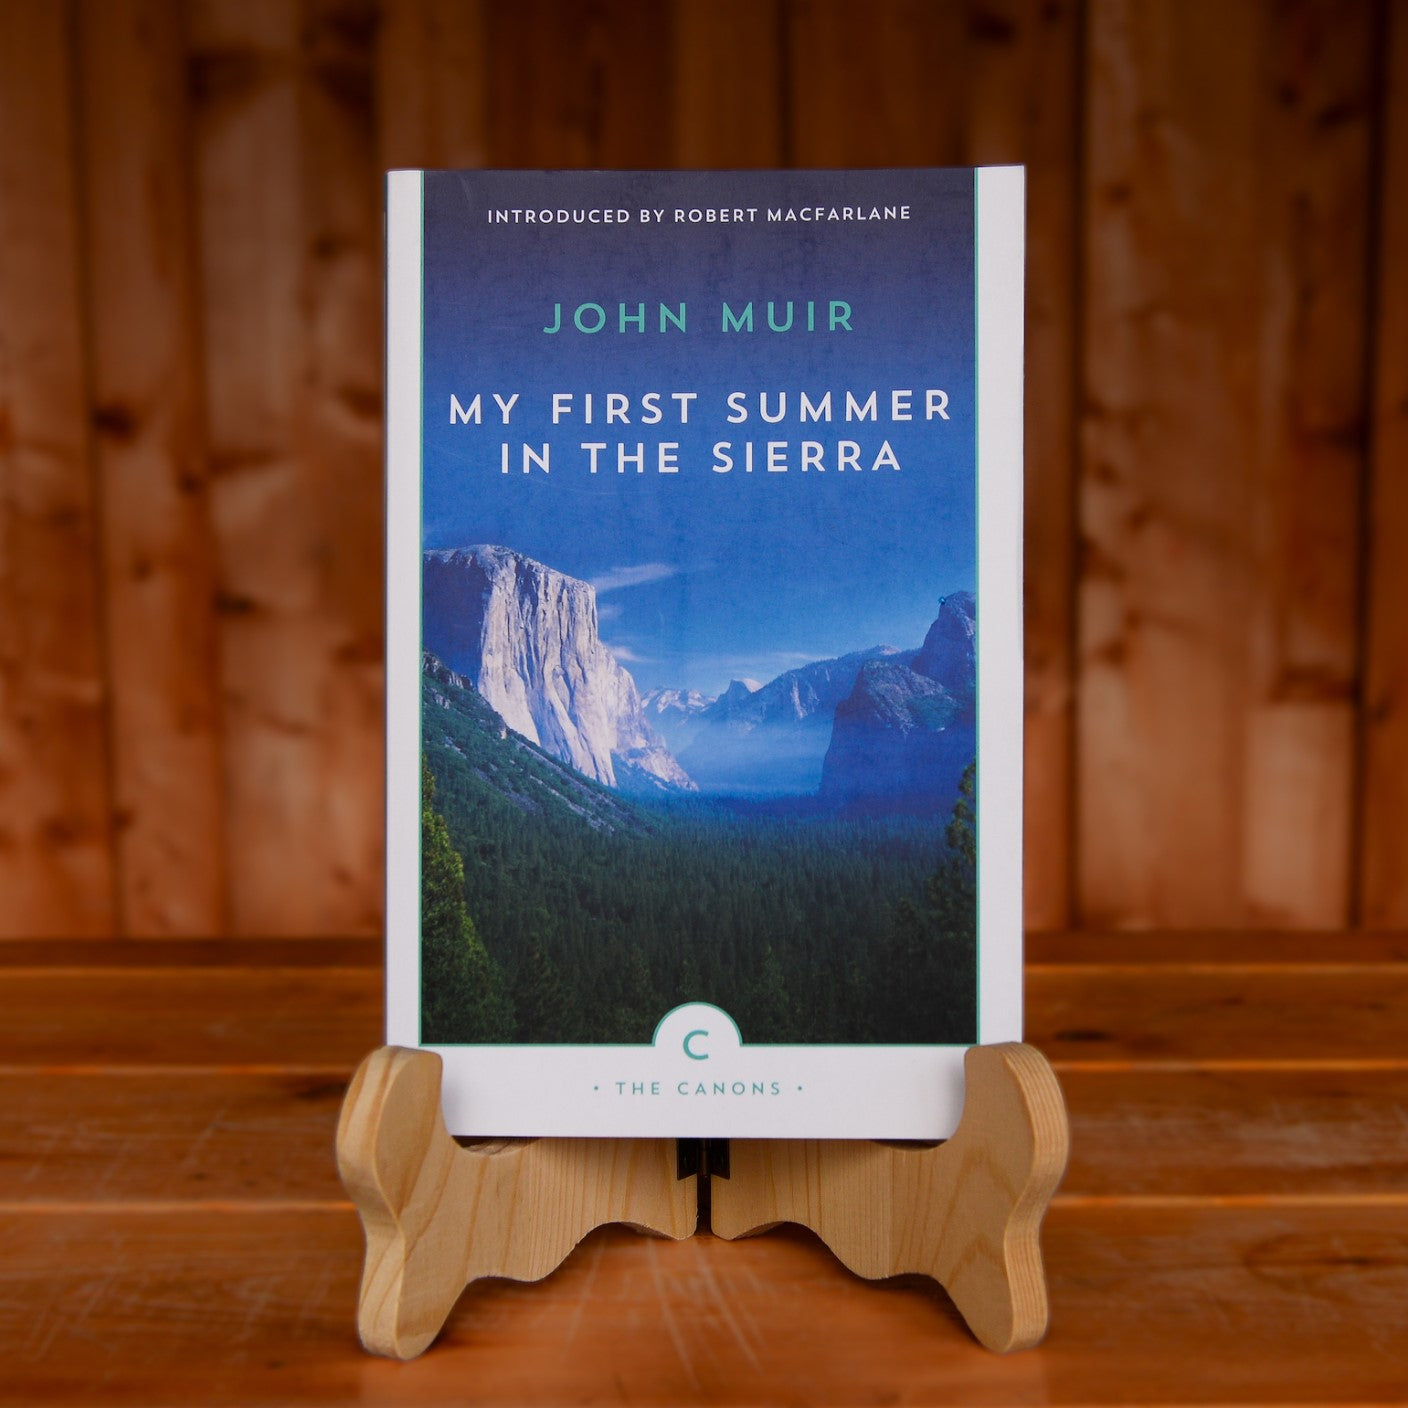 The book My First Summer in the Sierras by John Muir displayed on a book stand on a wooden table